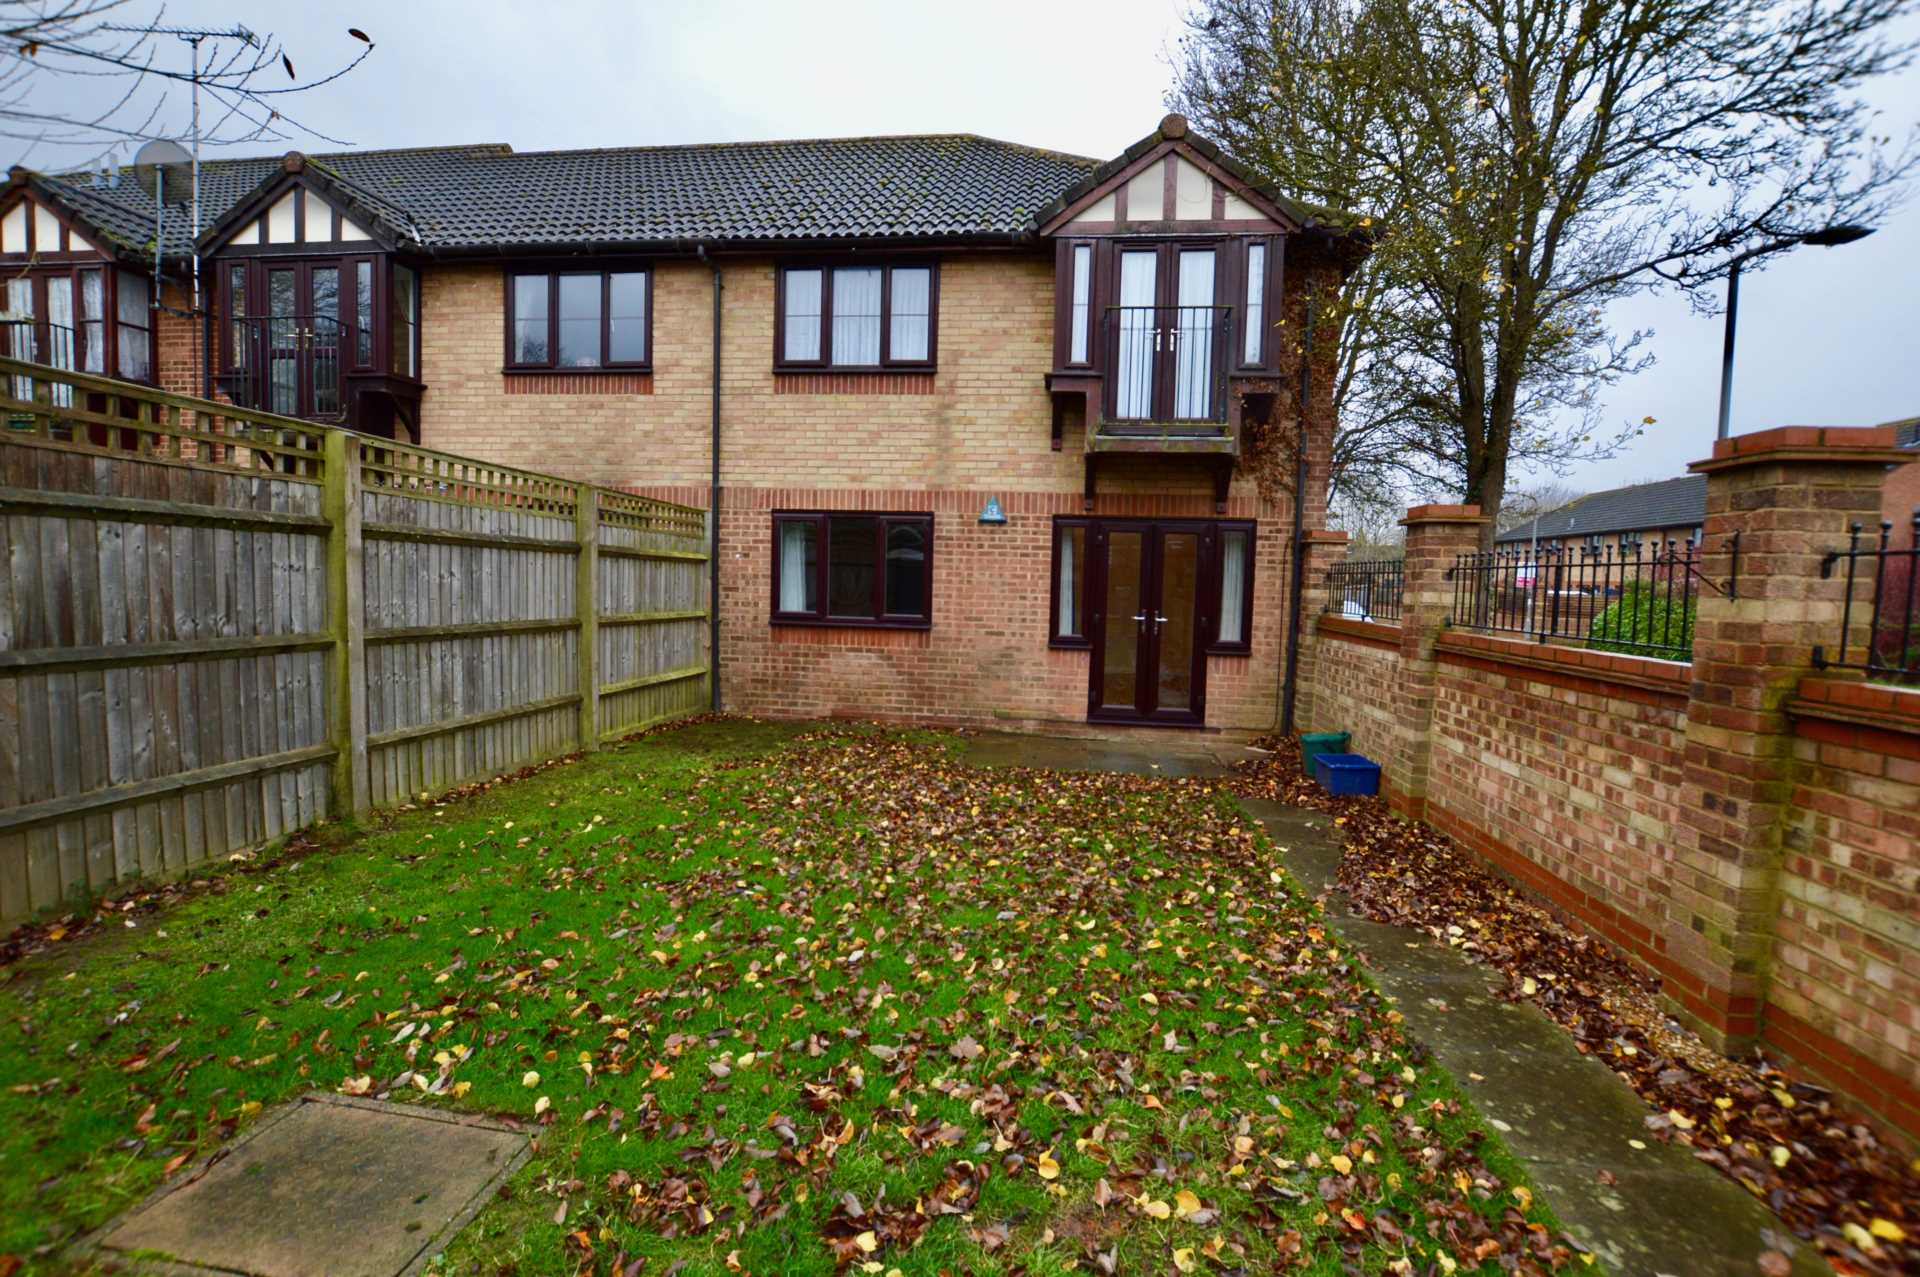 Penncress Way, Newport Pagnell, Image 2